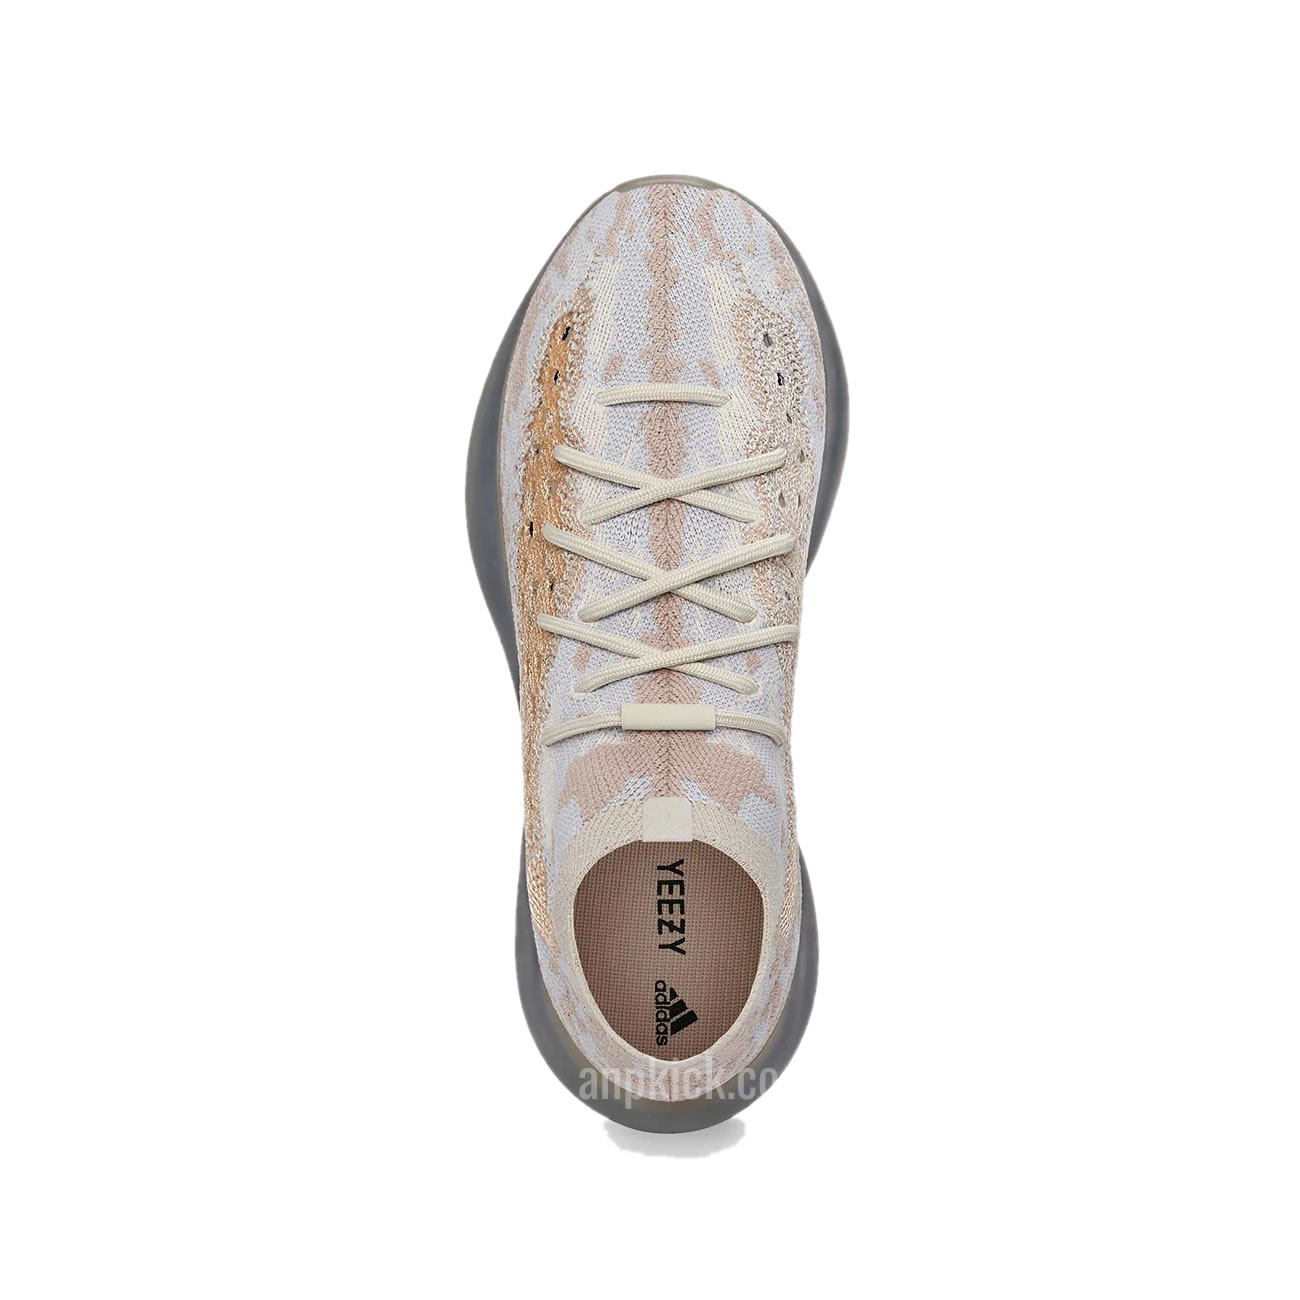 Adidas Yeezy Boost 380 Pepper Non Reflective Fz1269 New Release Date For Sale (4) - newkick.org